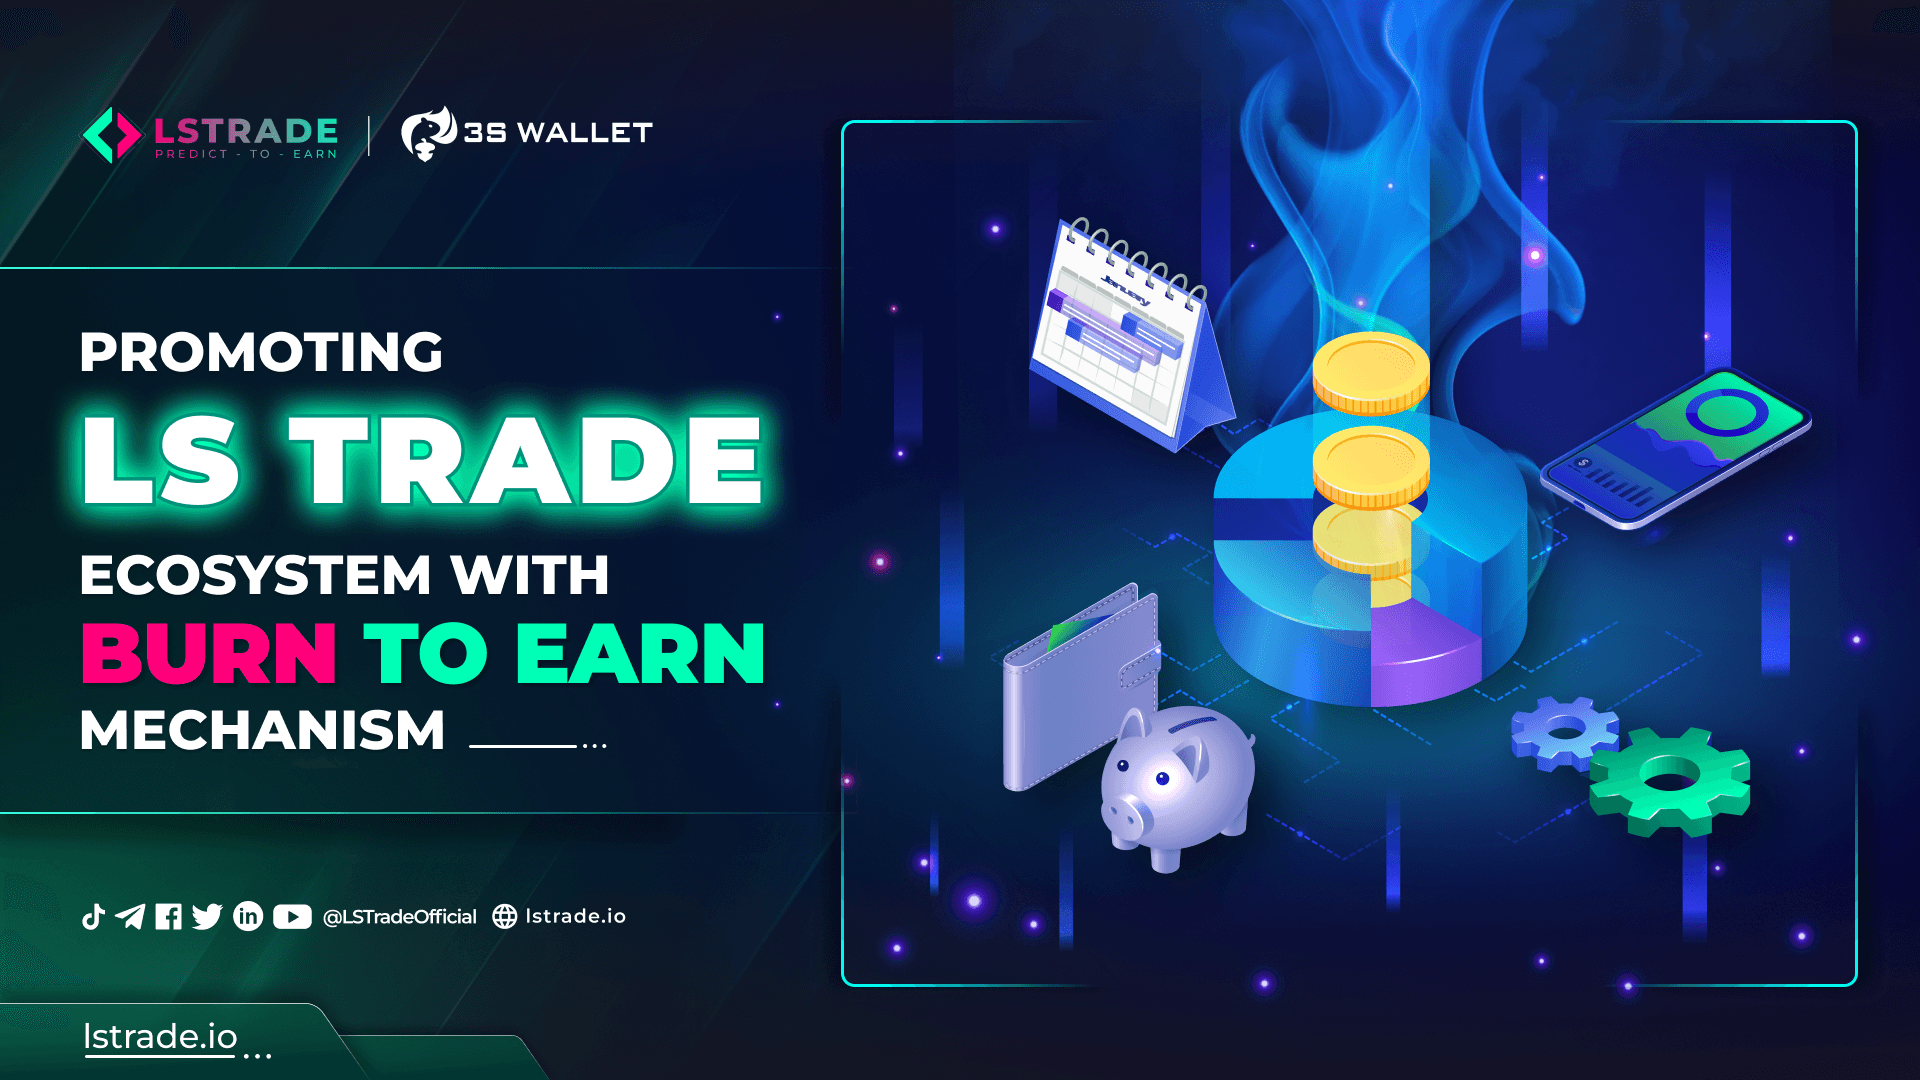 PROMOTE LS TRADE ECOSYSTEM WITH BURN-TO-EARN MECHANISM